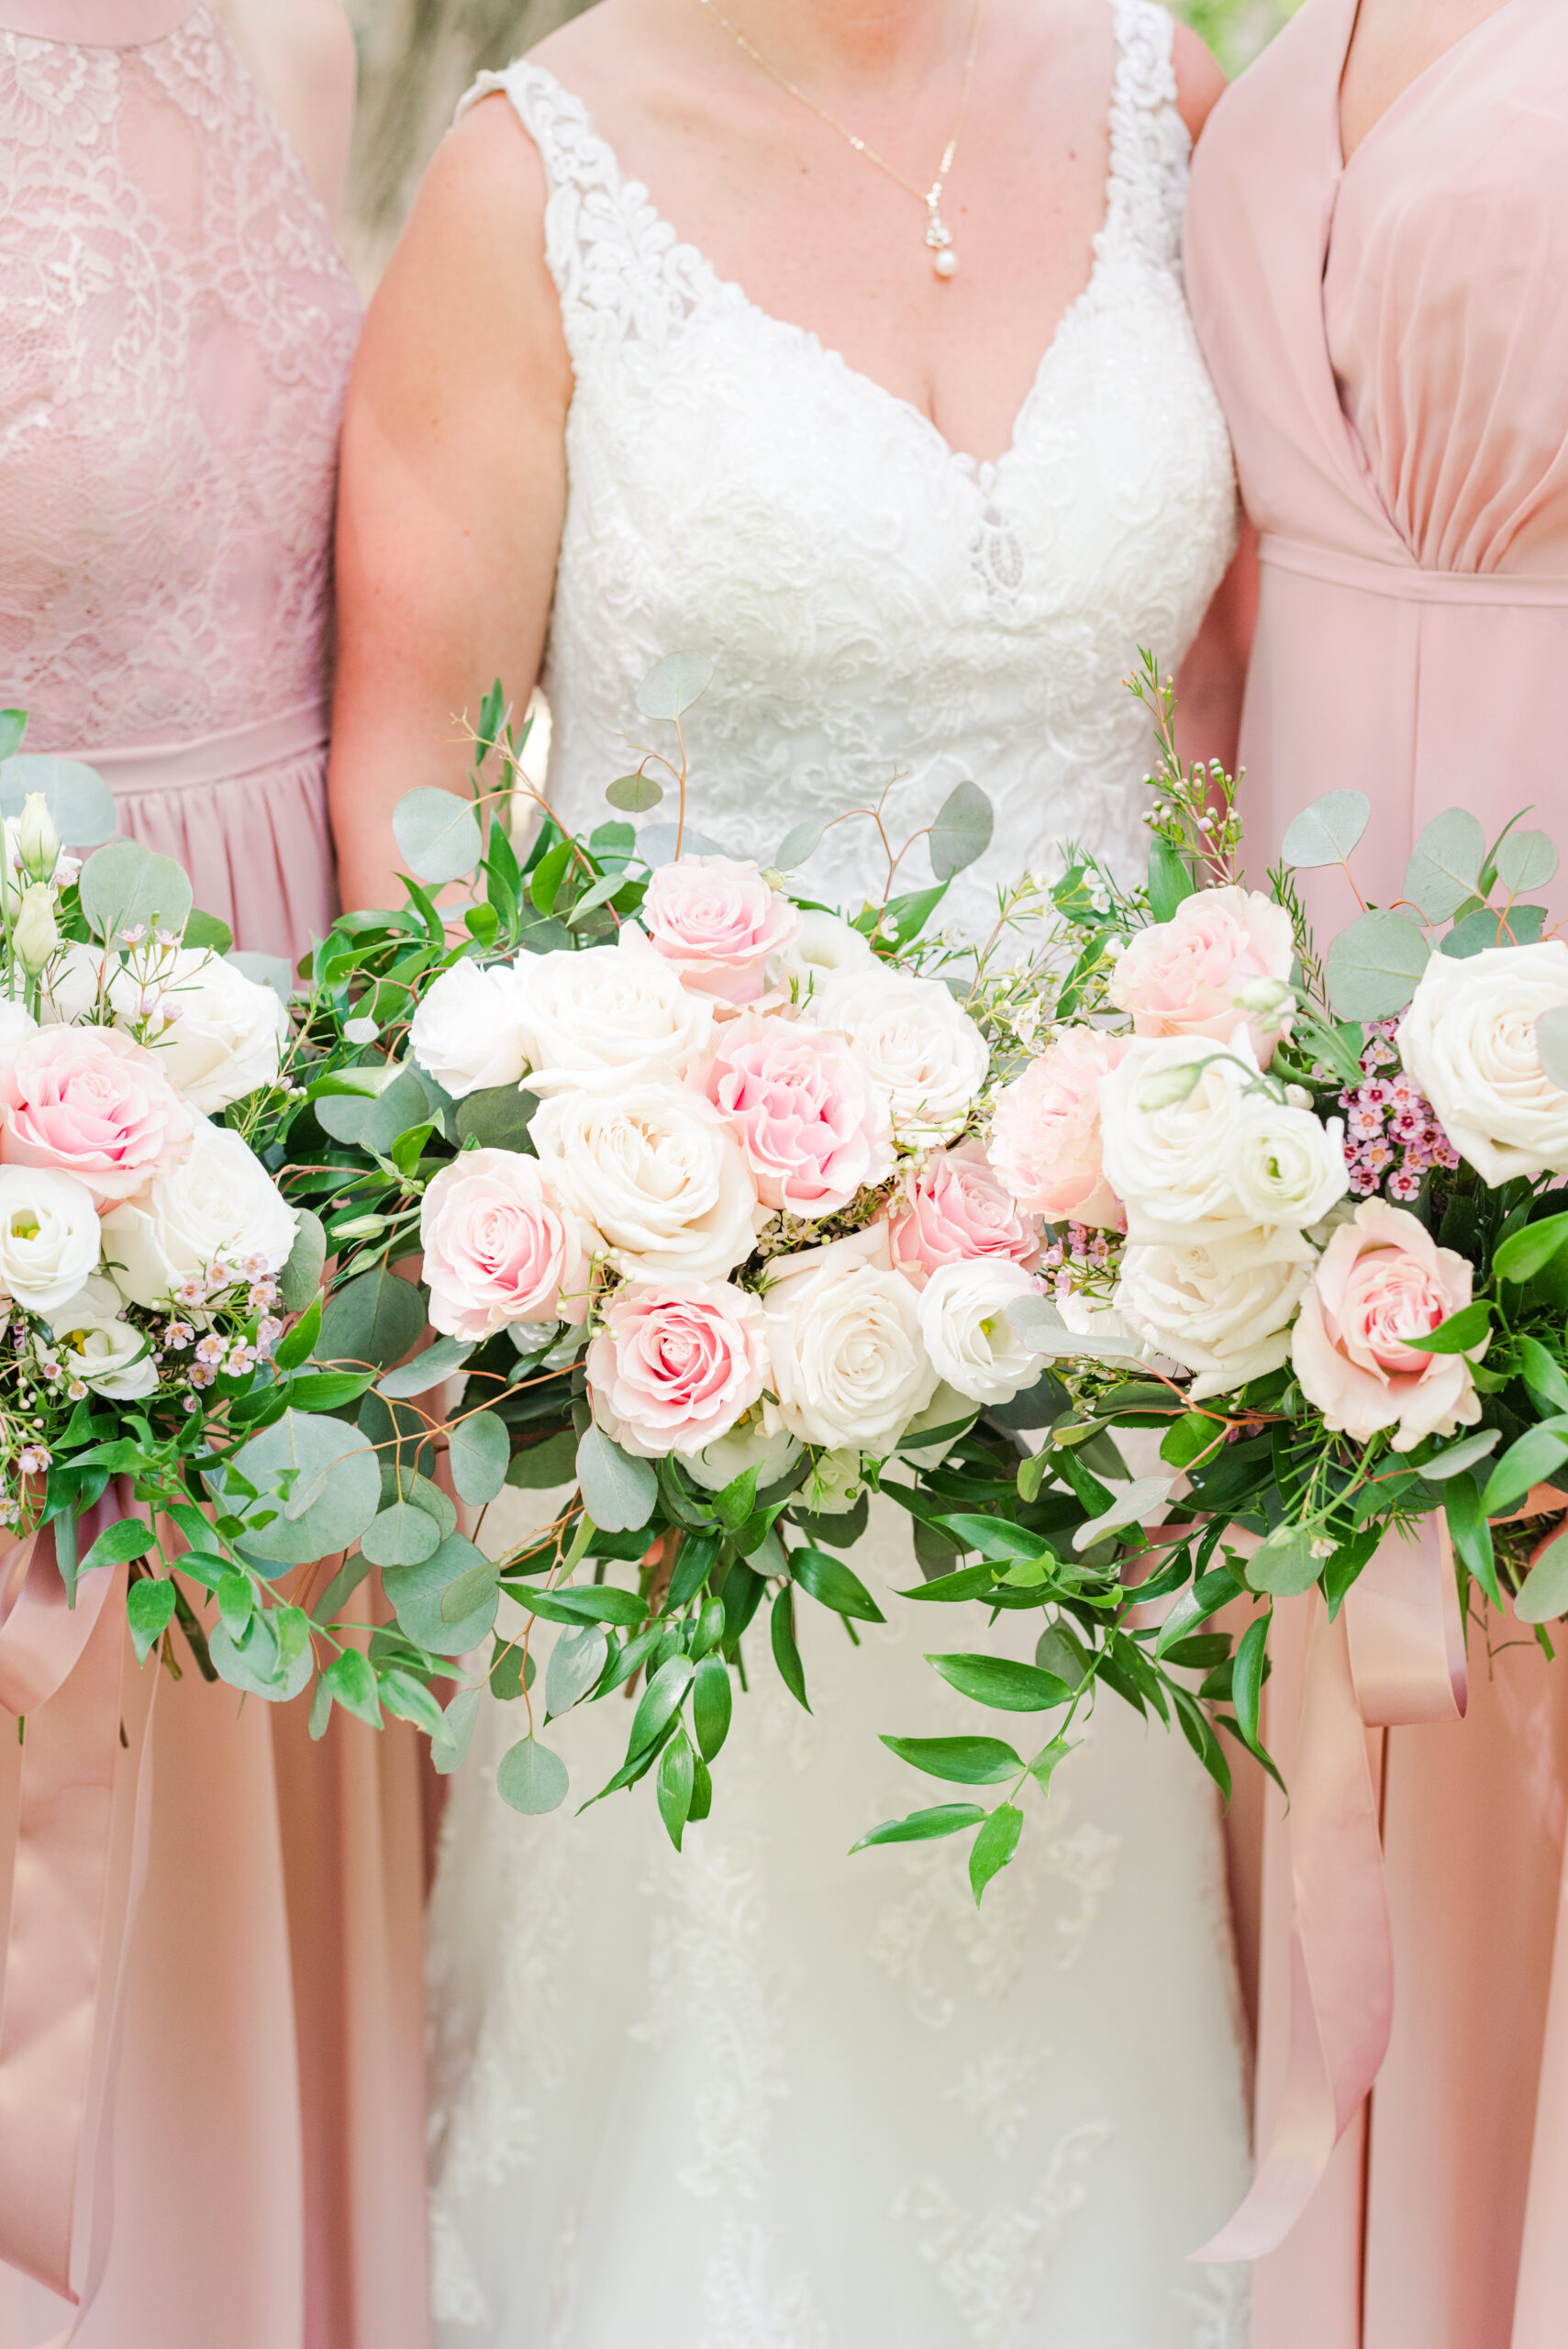 wedding bouquets being held by a bride and bridesmaids - used in a blog post about Honeybook for wedding photographers